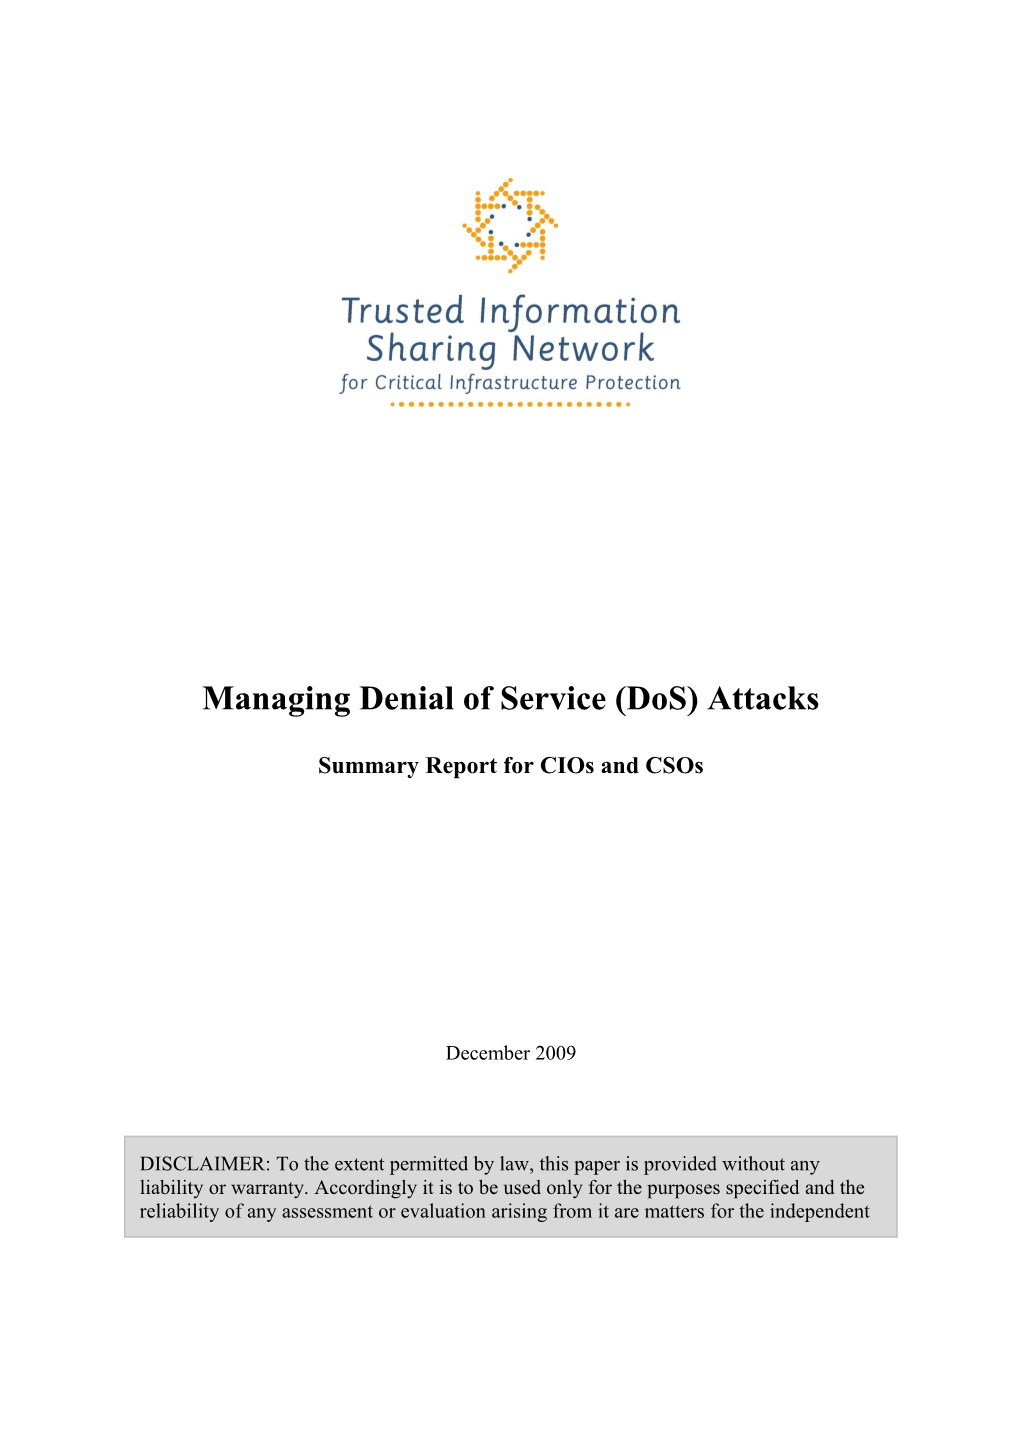 Ging Denial of Service (Dos) Attacks - Summary Report for Cios and Csos DOC 210KB